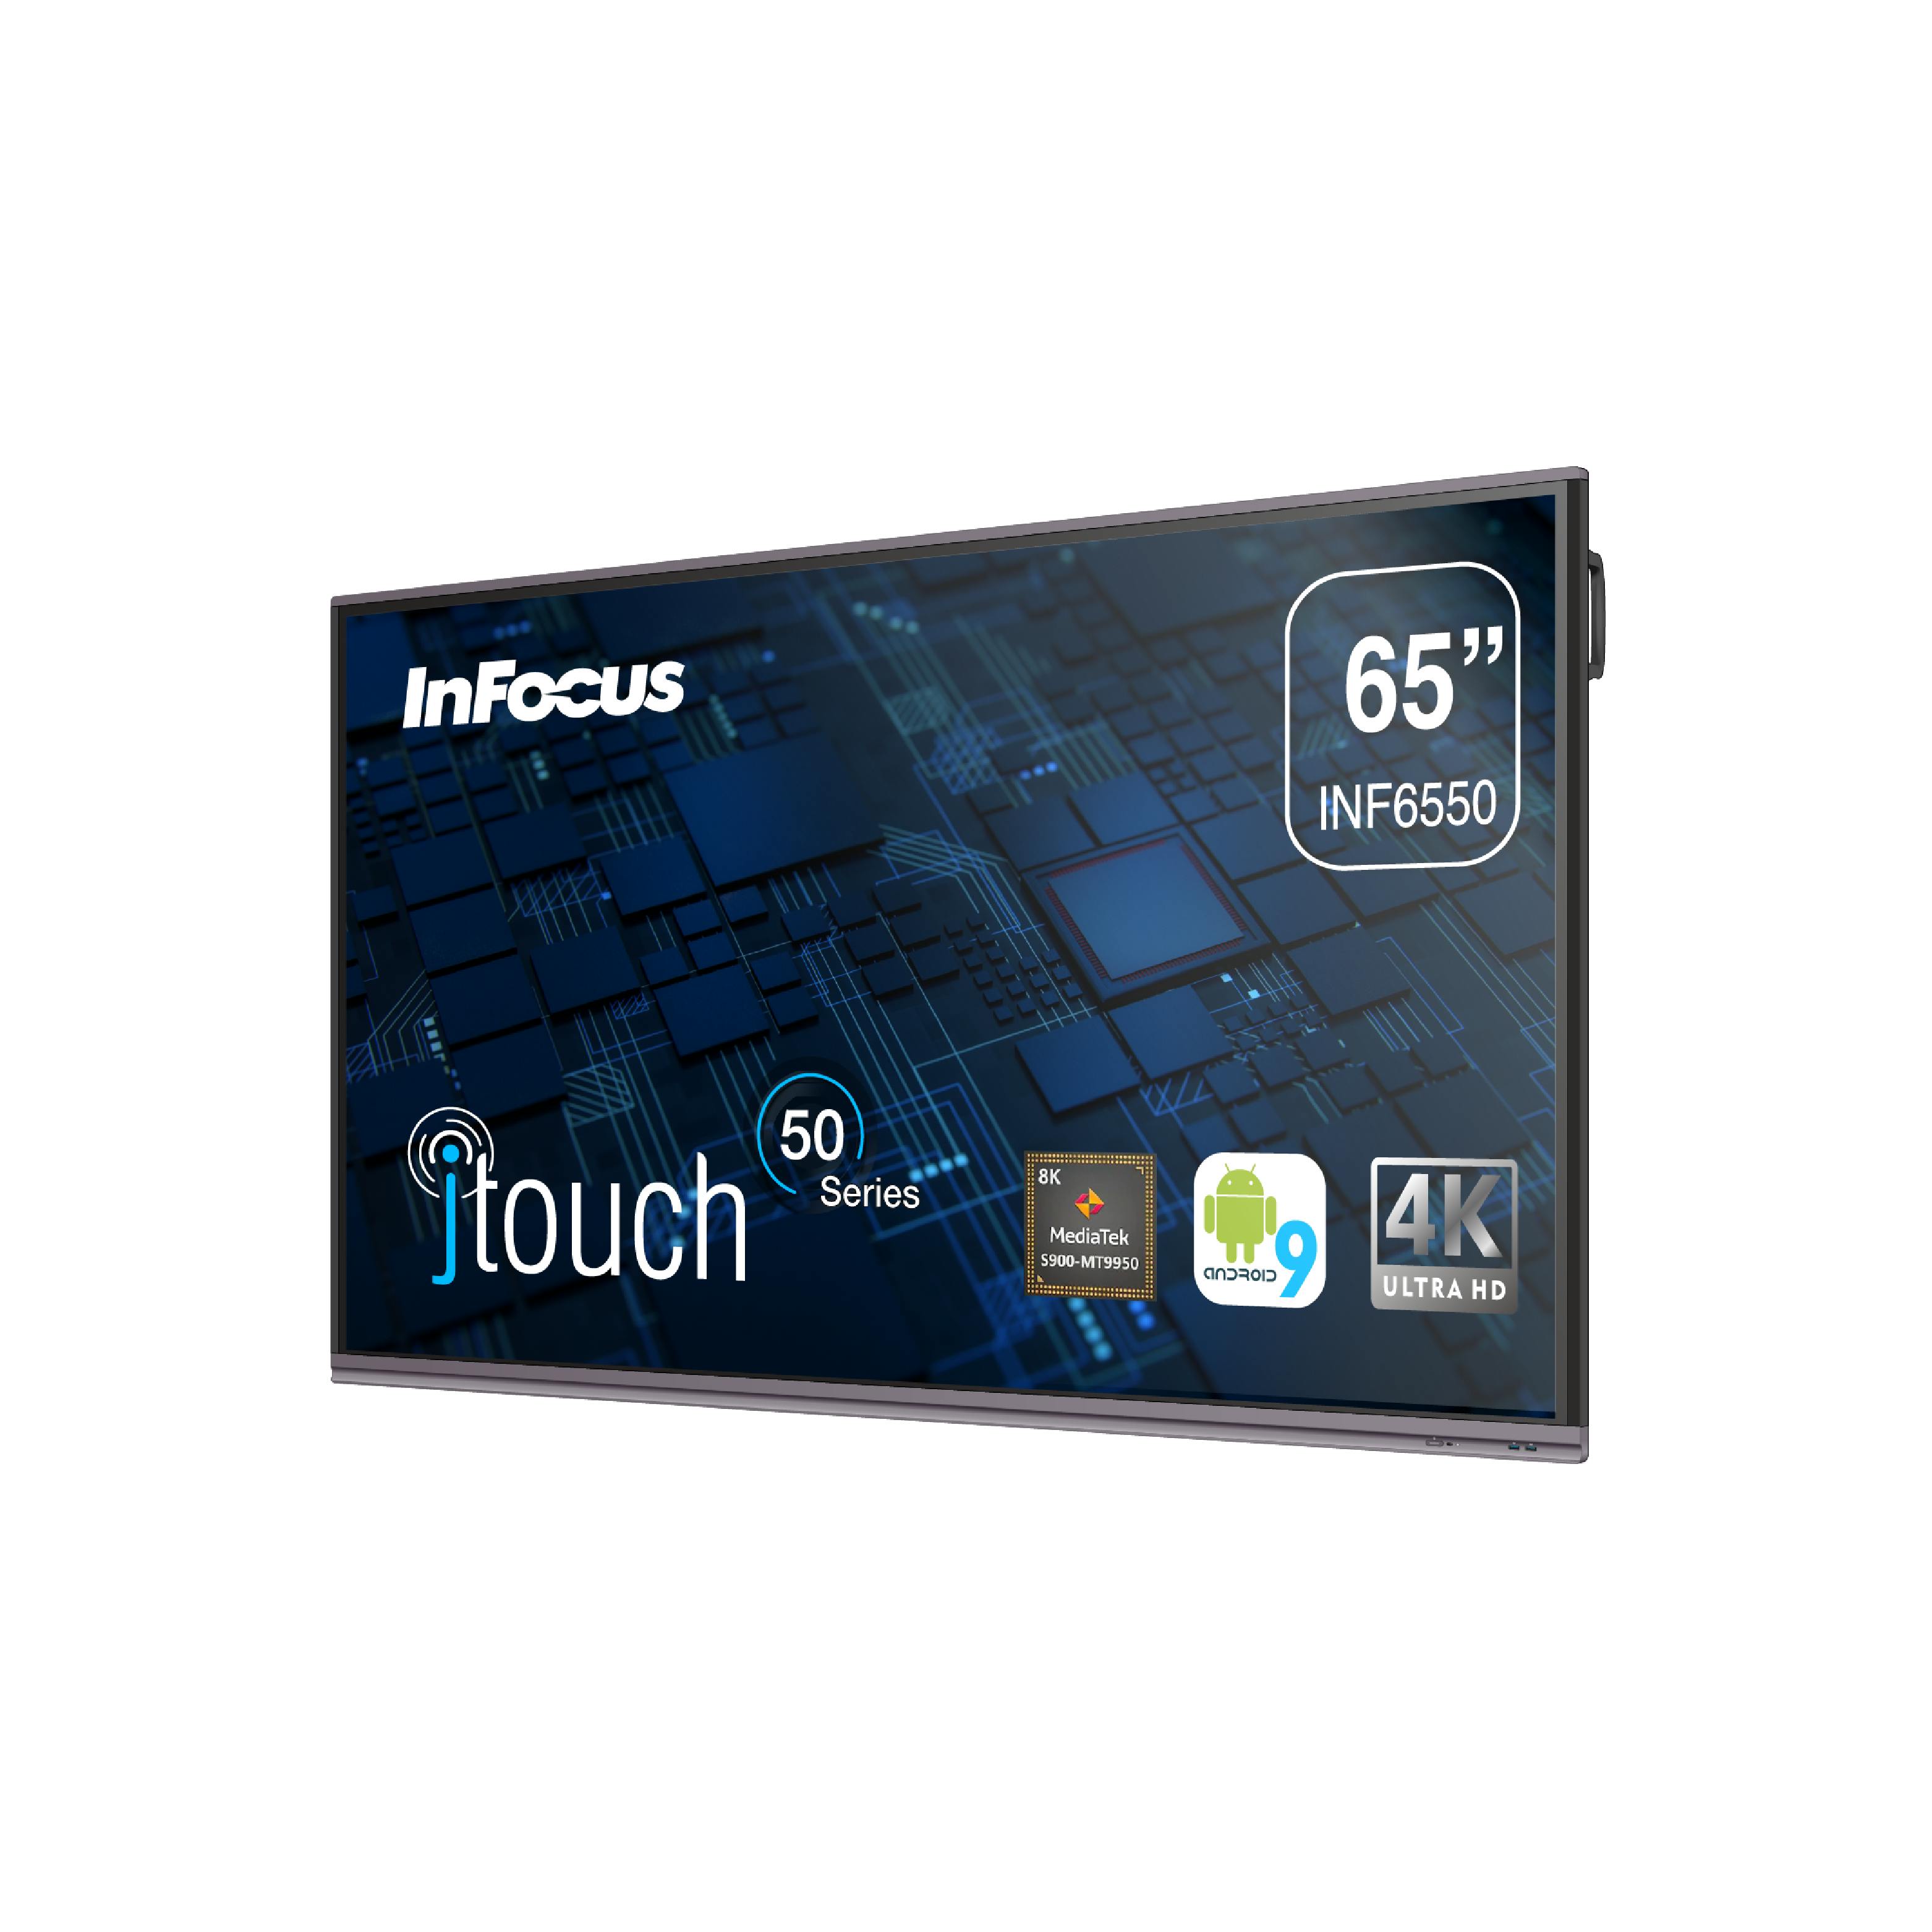 https://infocus.imgix.net/2022/04/JTouch-50-Series_INF6550_FR_90-01.png?auto=compress%2Cformat&ixlib=php-3.3.1